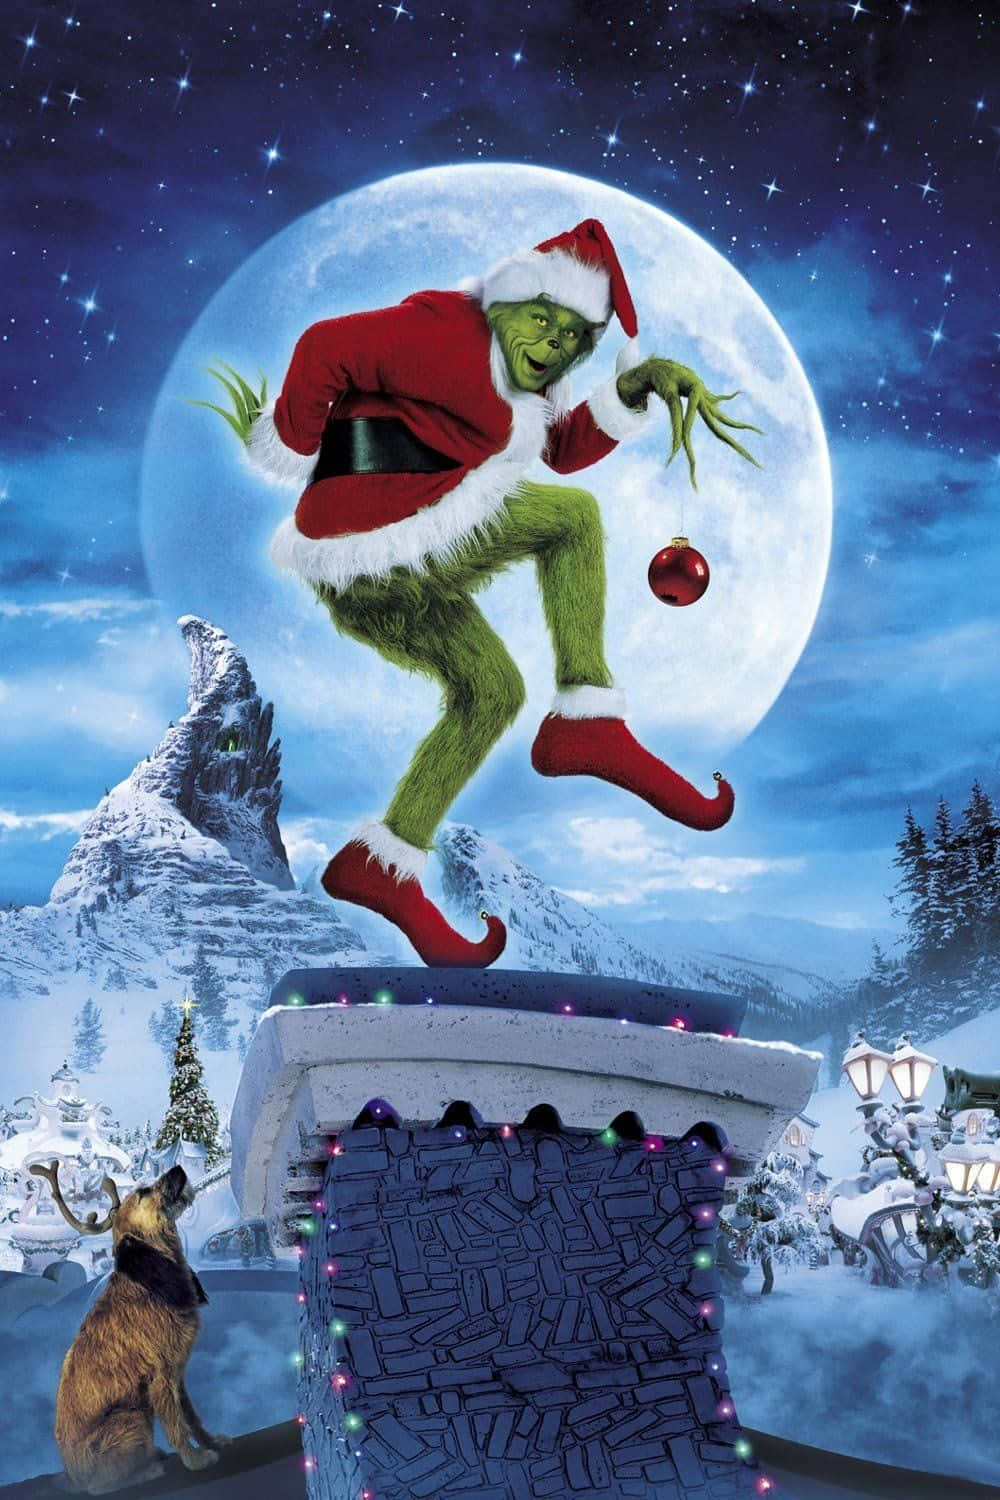 Spread holiday cheer with a smirk, the Christmas Grinch is here! Wallpaper